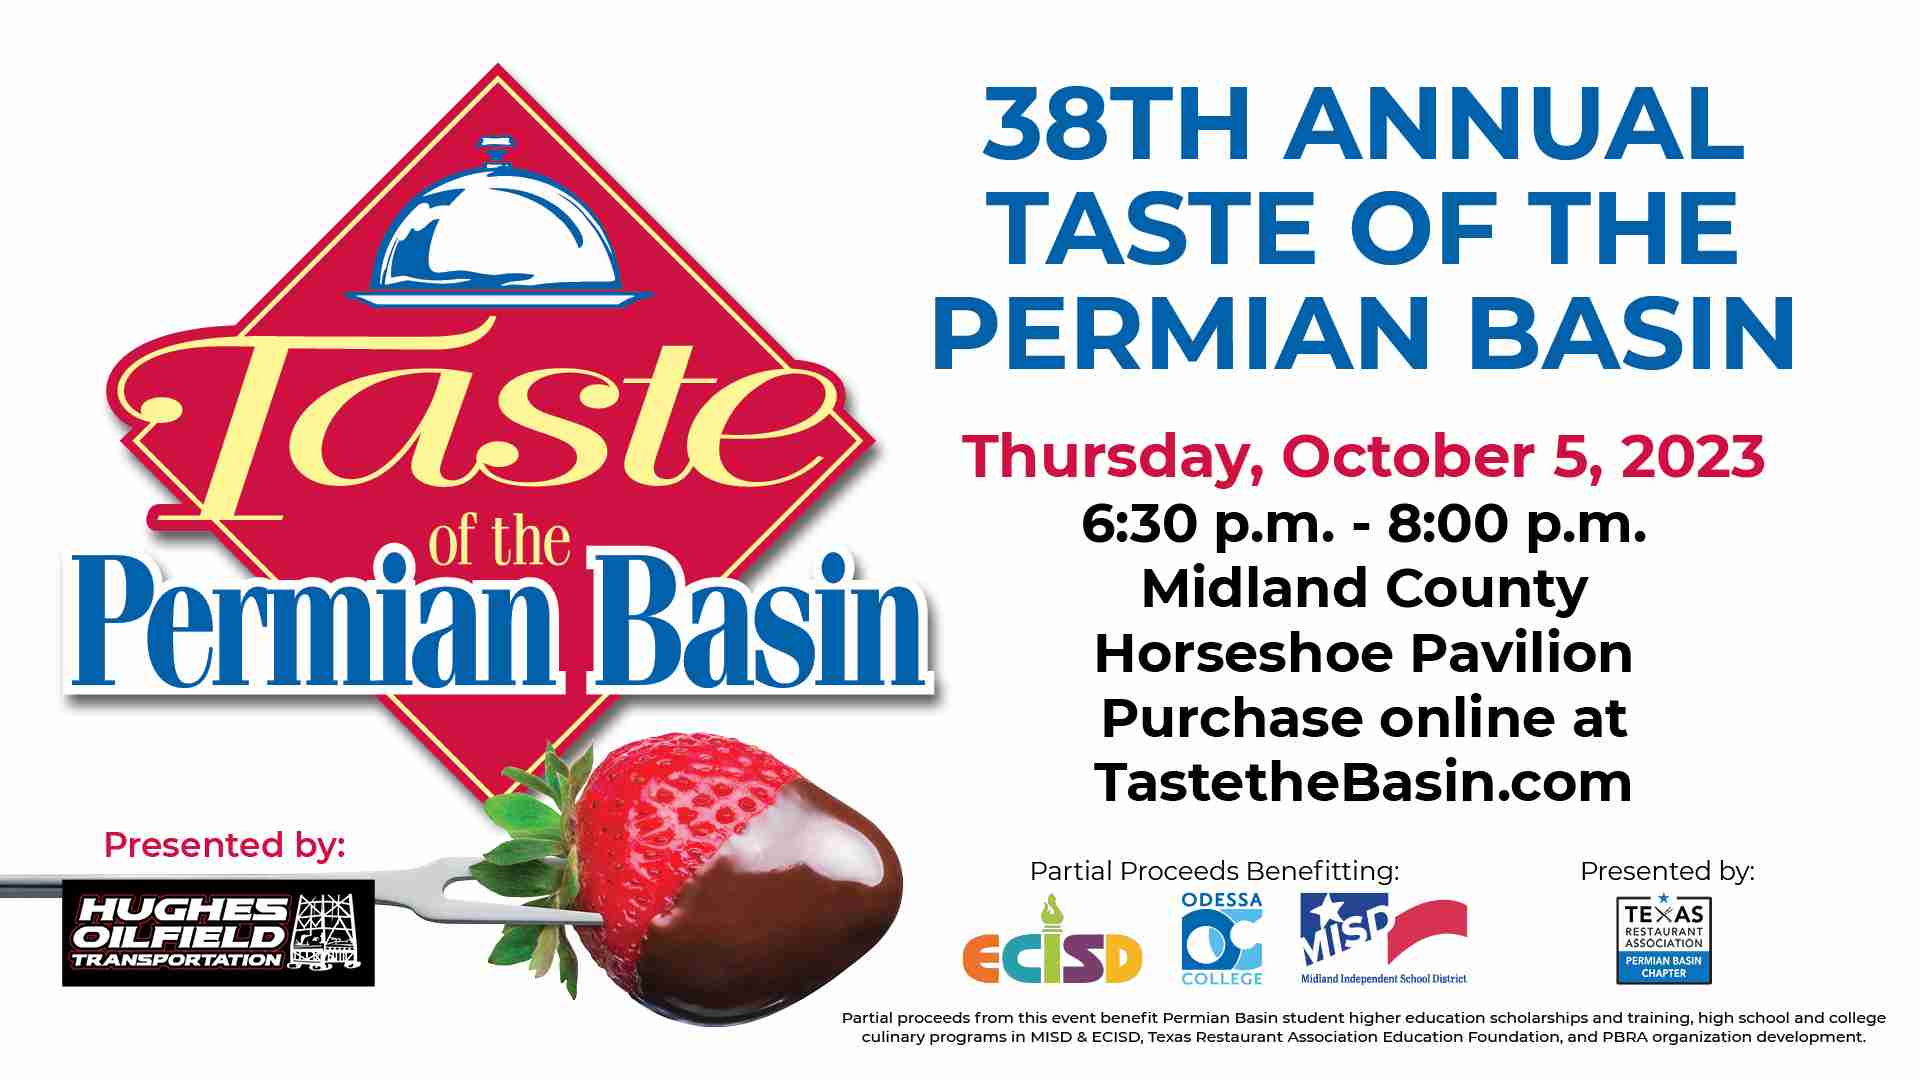 Taste of the Permian Basin at Midland County Horseshoe Pavilion on October 5, 2023 in Midland, TX.